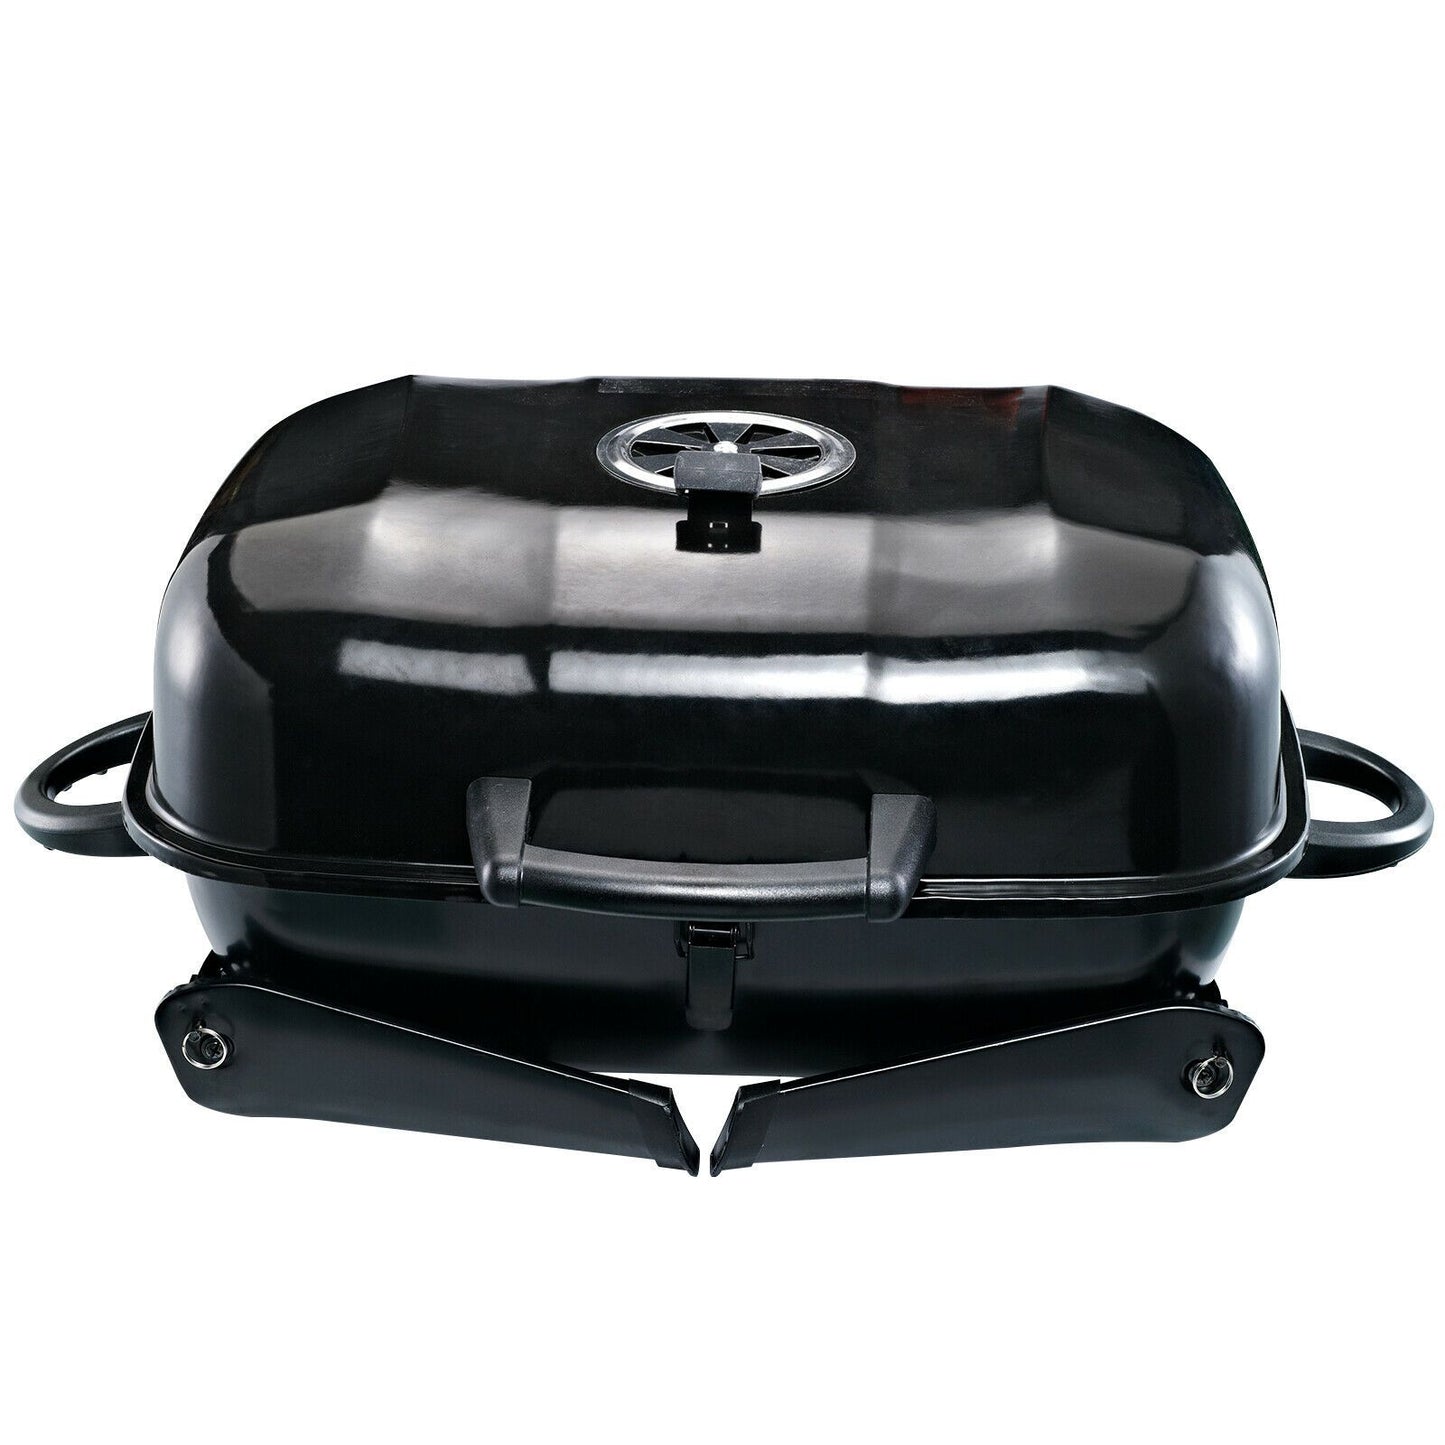 Portable Compact Outdoor Tabletop Backyard Charcoal BBQ Grill - Westfield Retailers